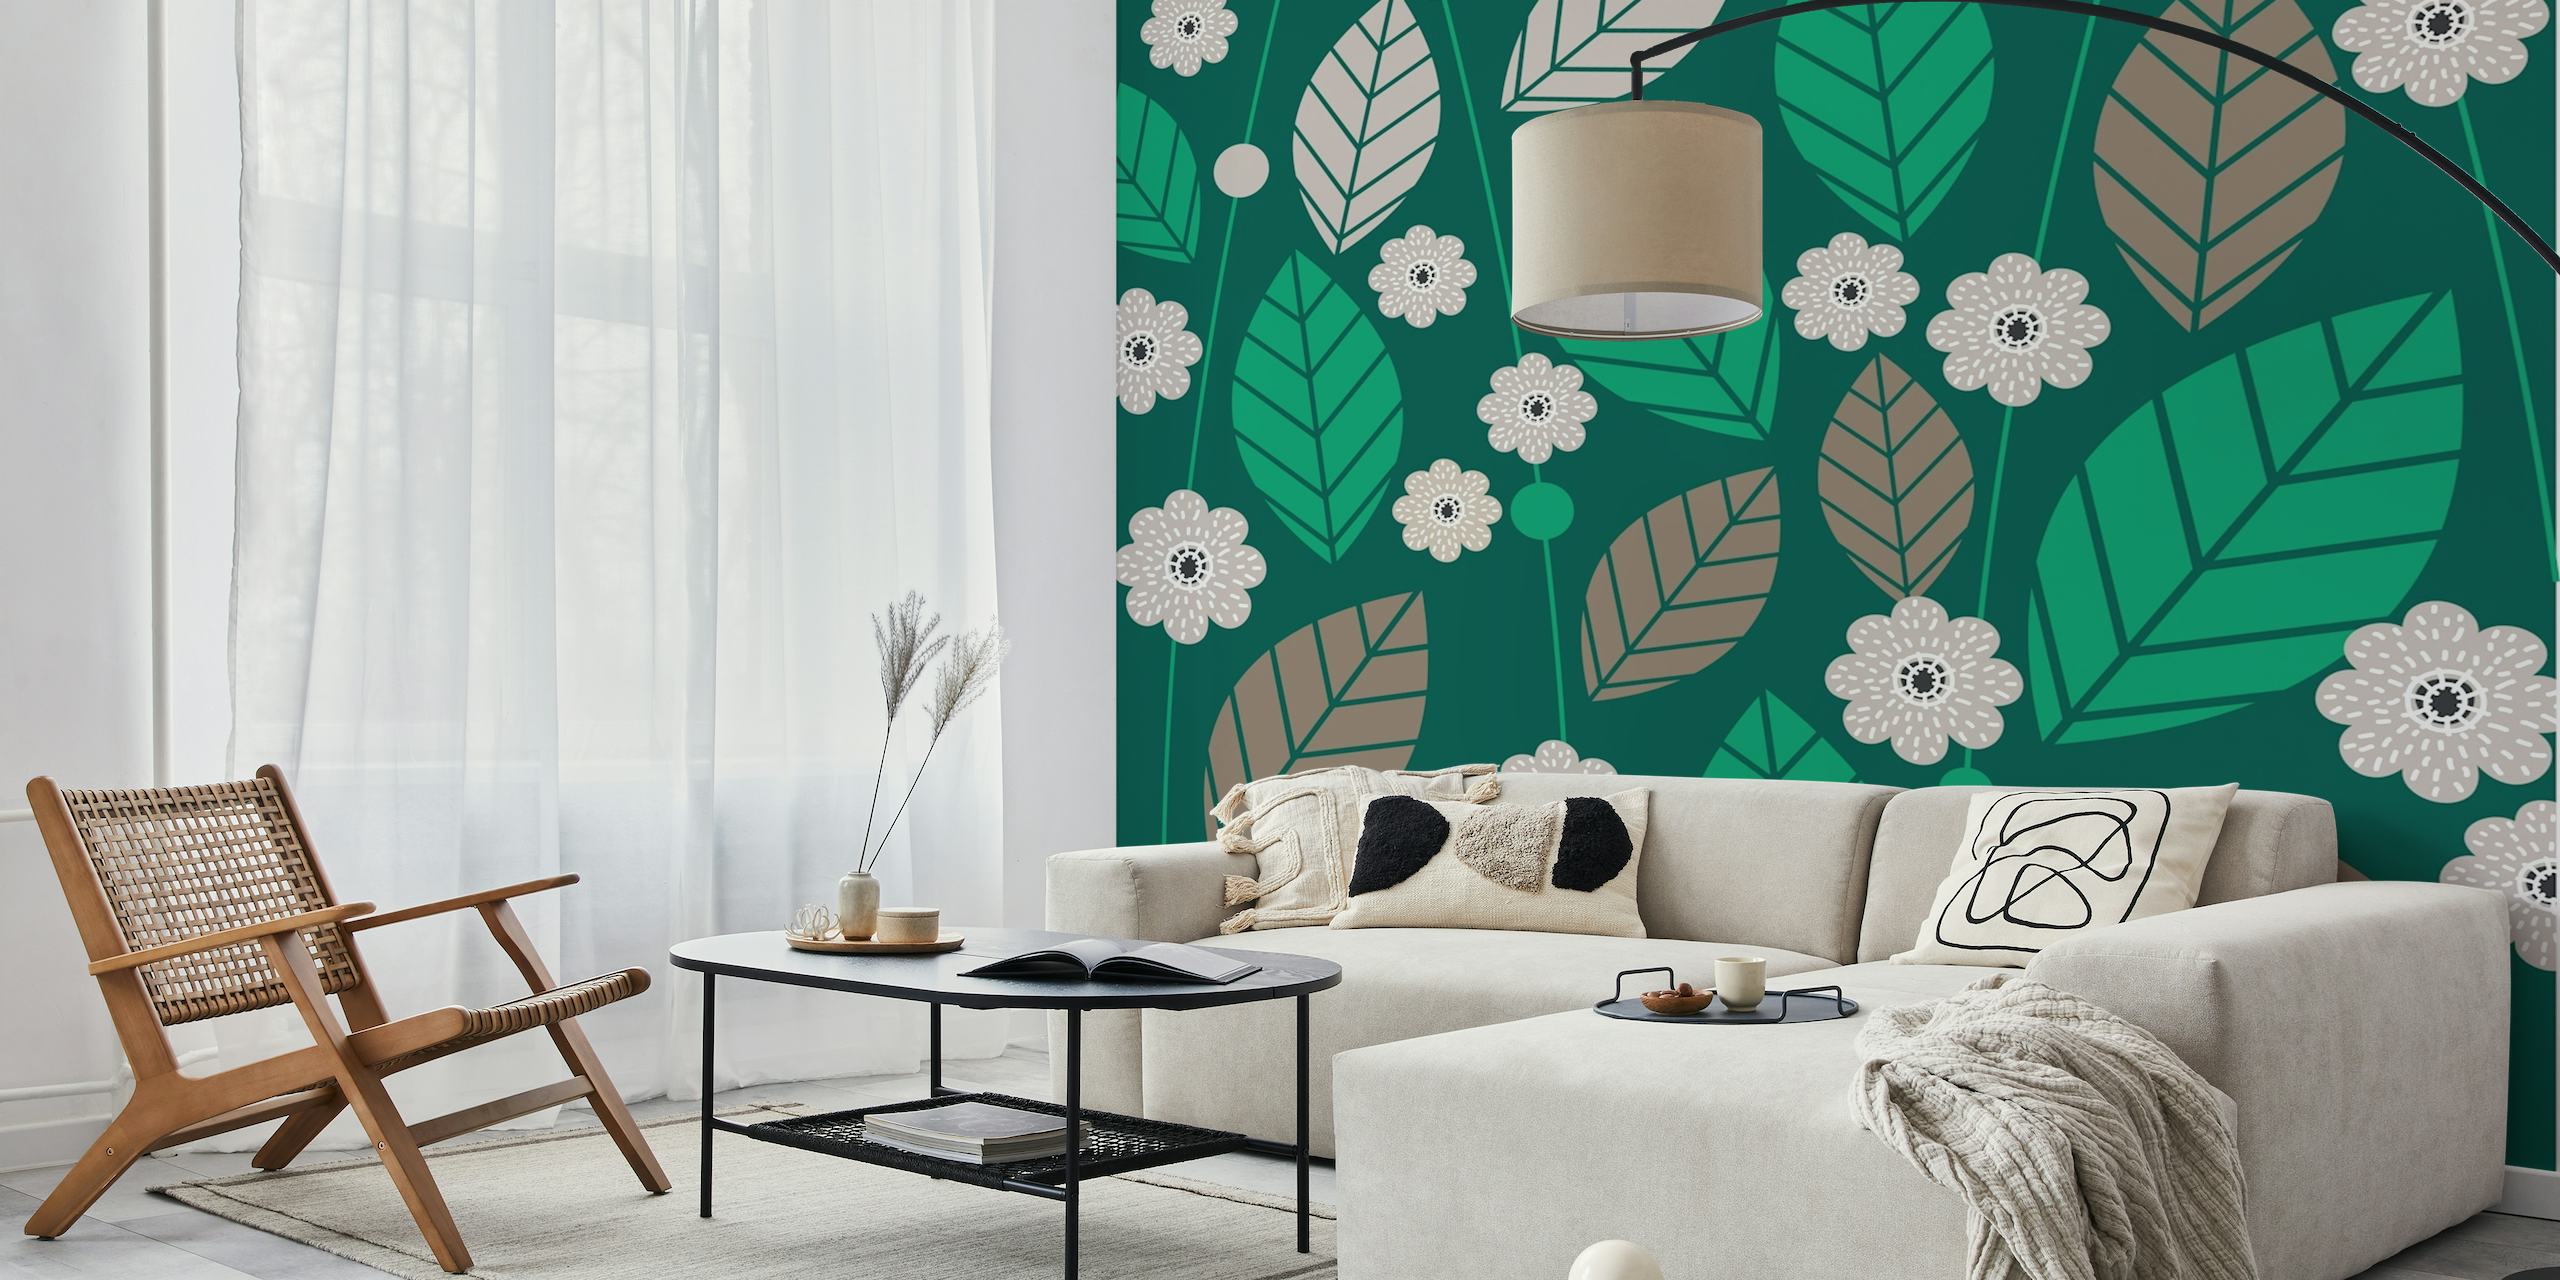 Forest Green Leaves Flowers Pattern wall mural featuring green foliage and white flowers on a dark background.